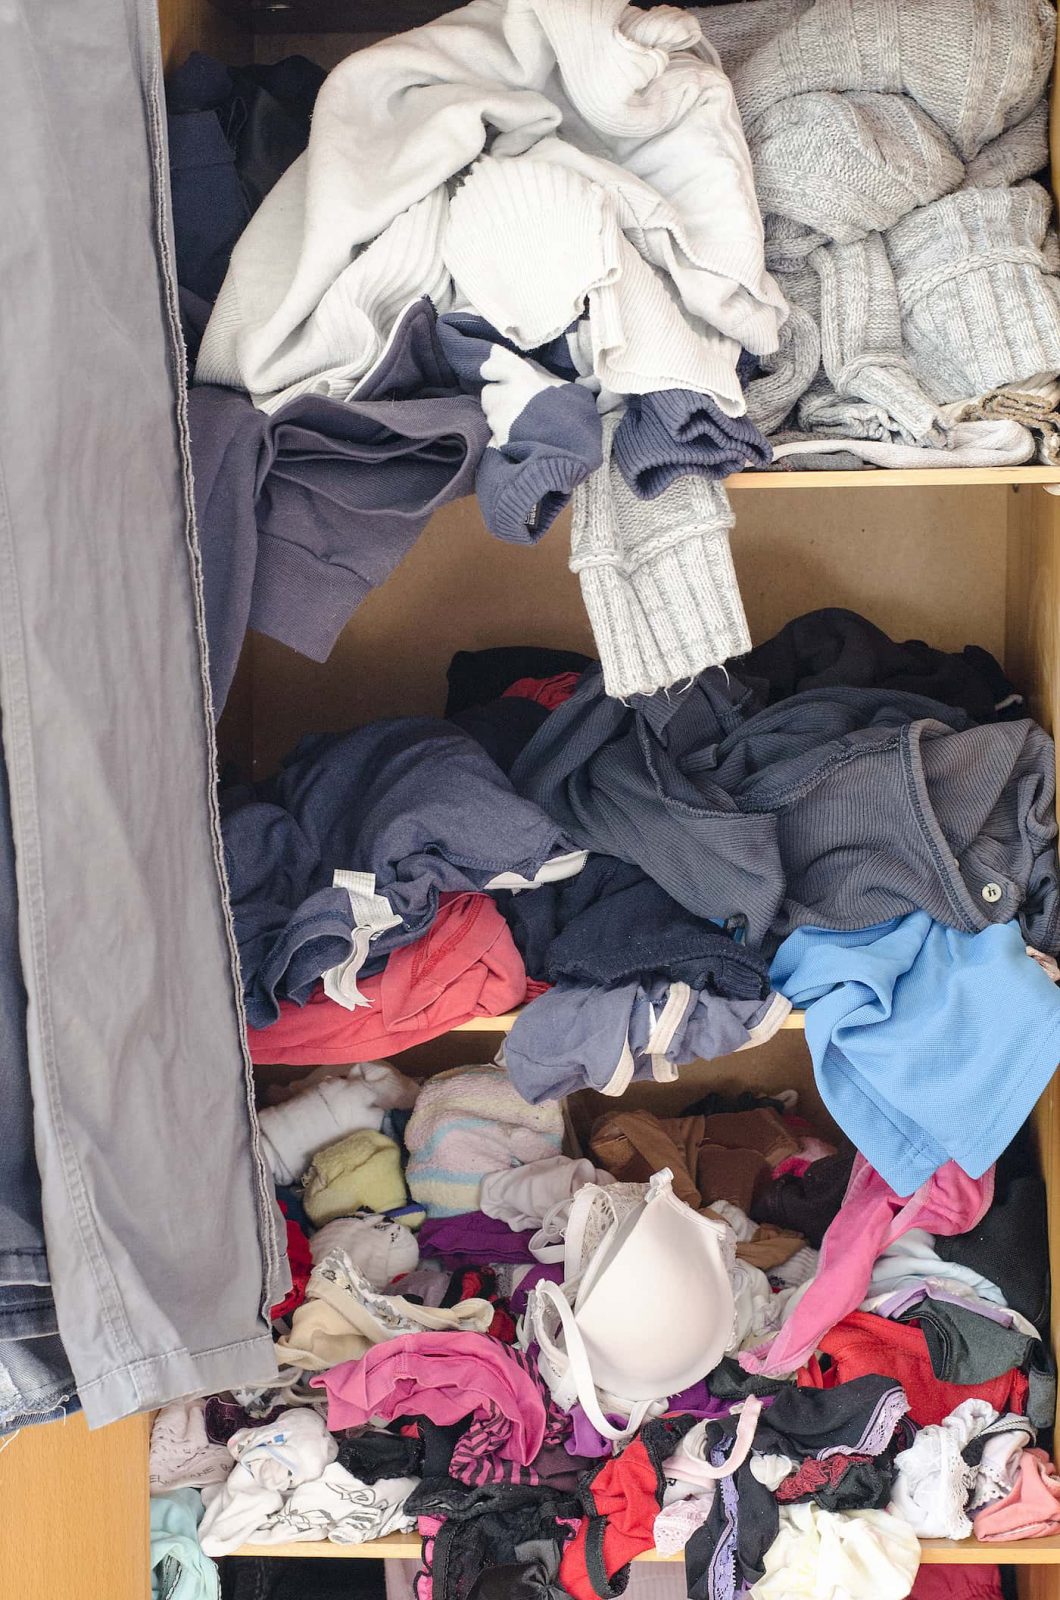 Have a Messy Closet? Check Out These 8 Great Closet Organization Tools & Ideas